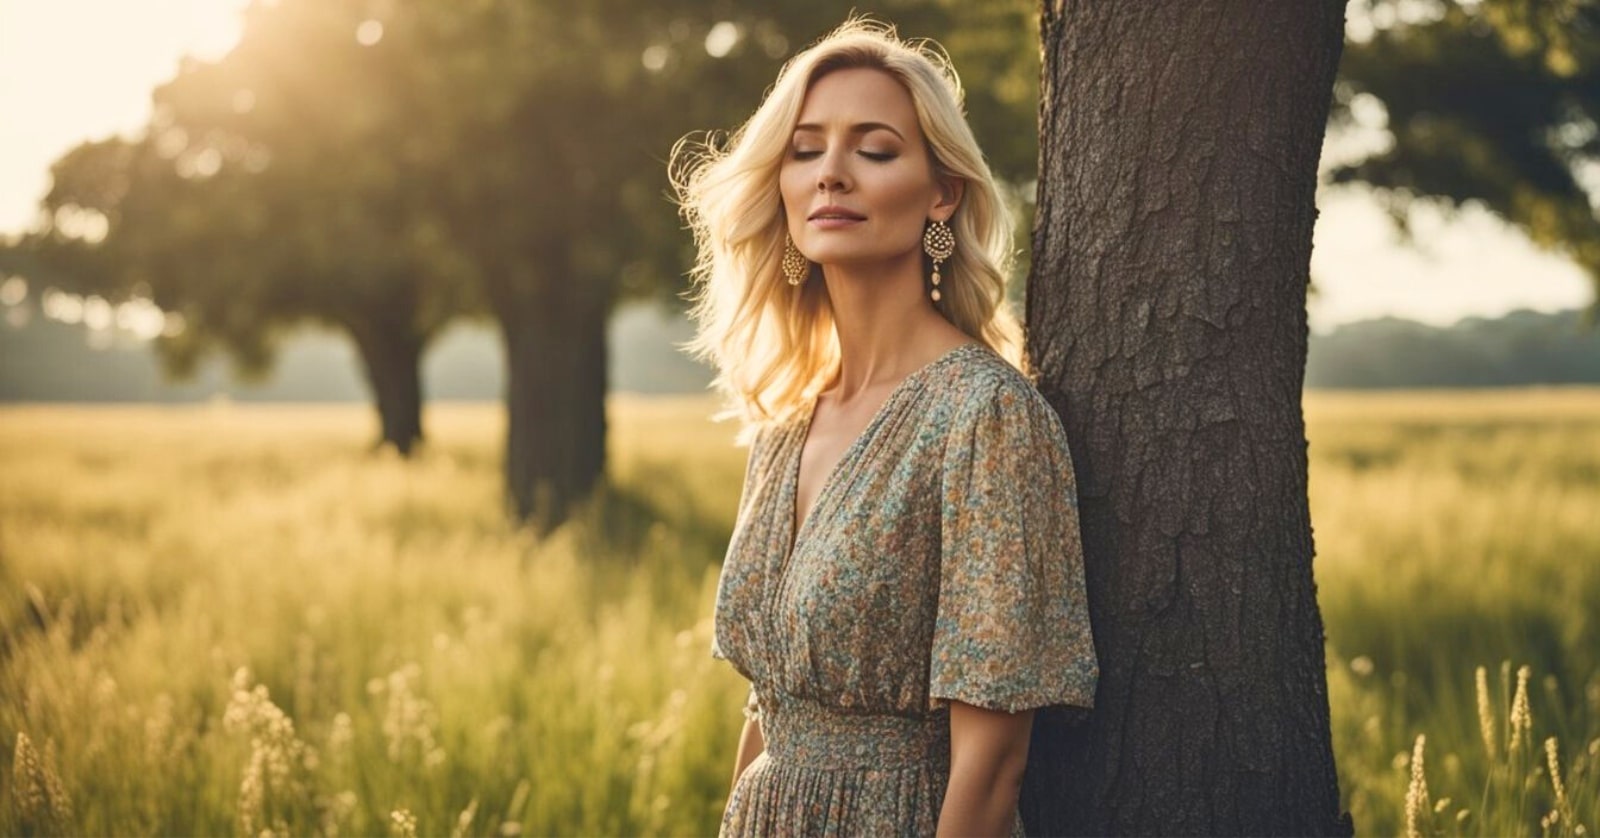 blonde woman in her later 30s to early 40s, leaning against a tree in a field with the sun's rays on her, she is wearing a floral maxi dress and her eyes are closed